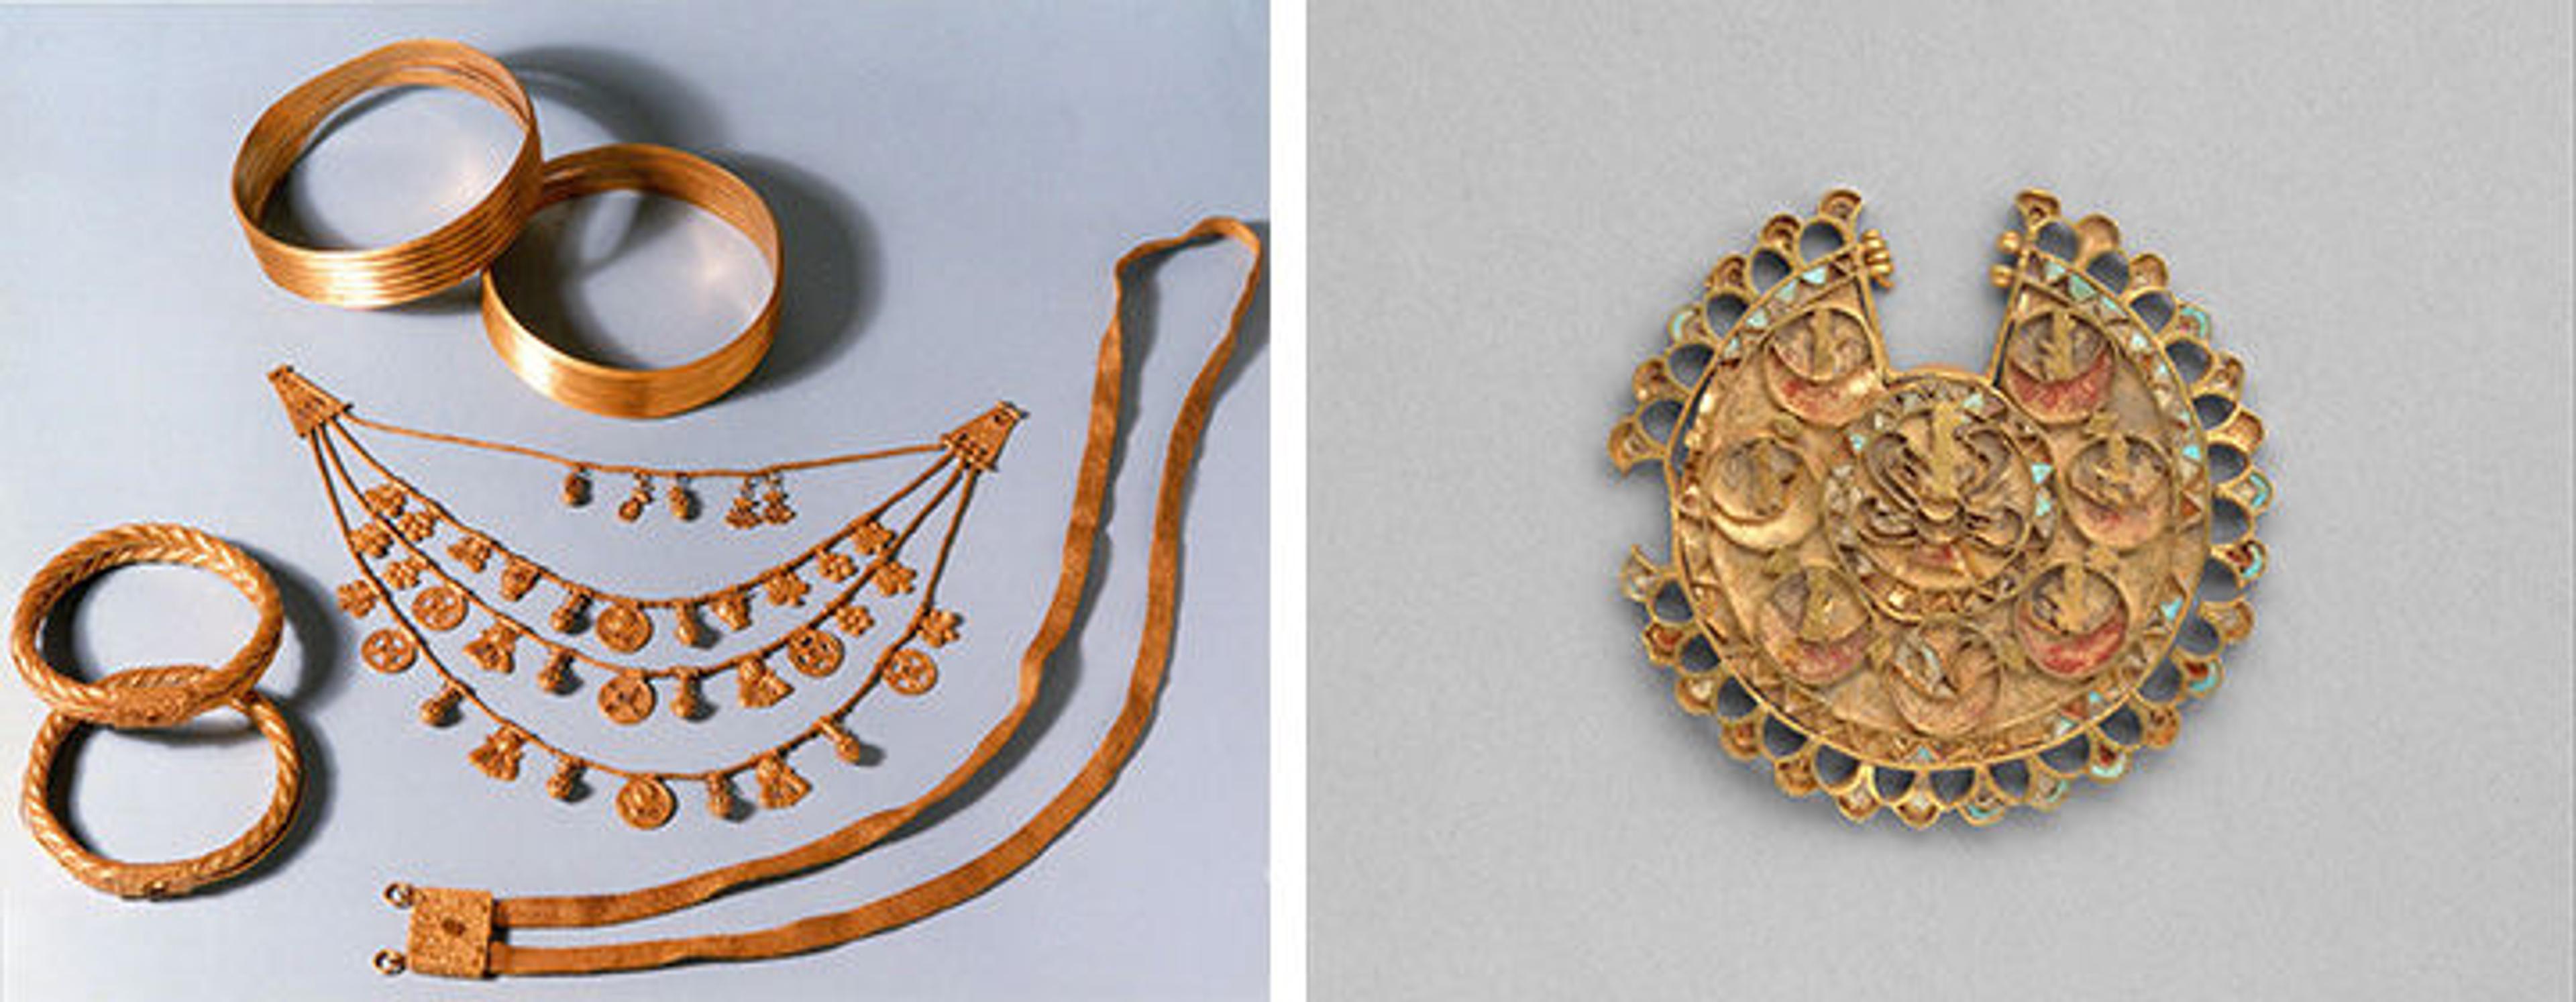 Gold jewelry from circa 4th century BC Spain and Iran